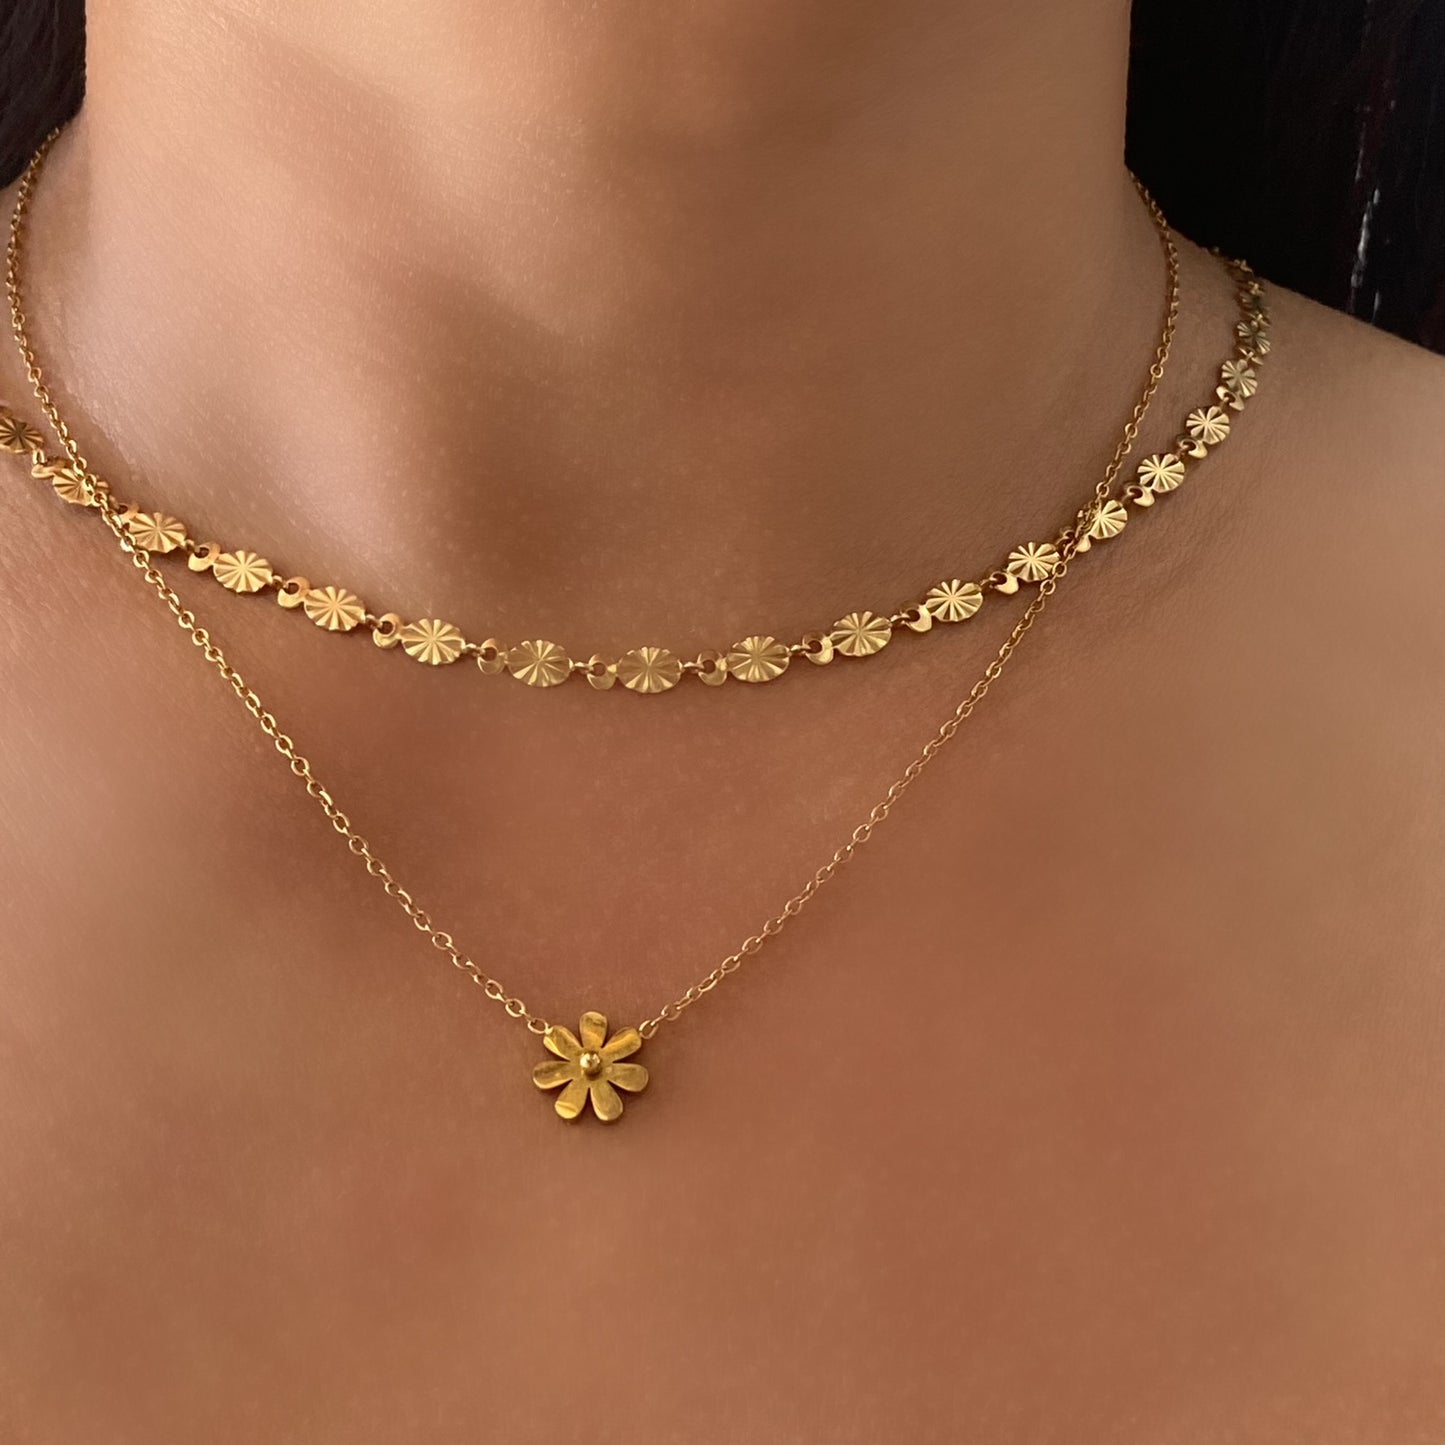 Daisy Stainless Steel Gold Necklace